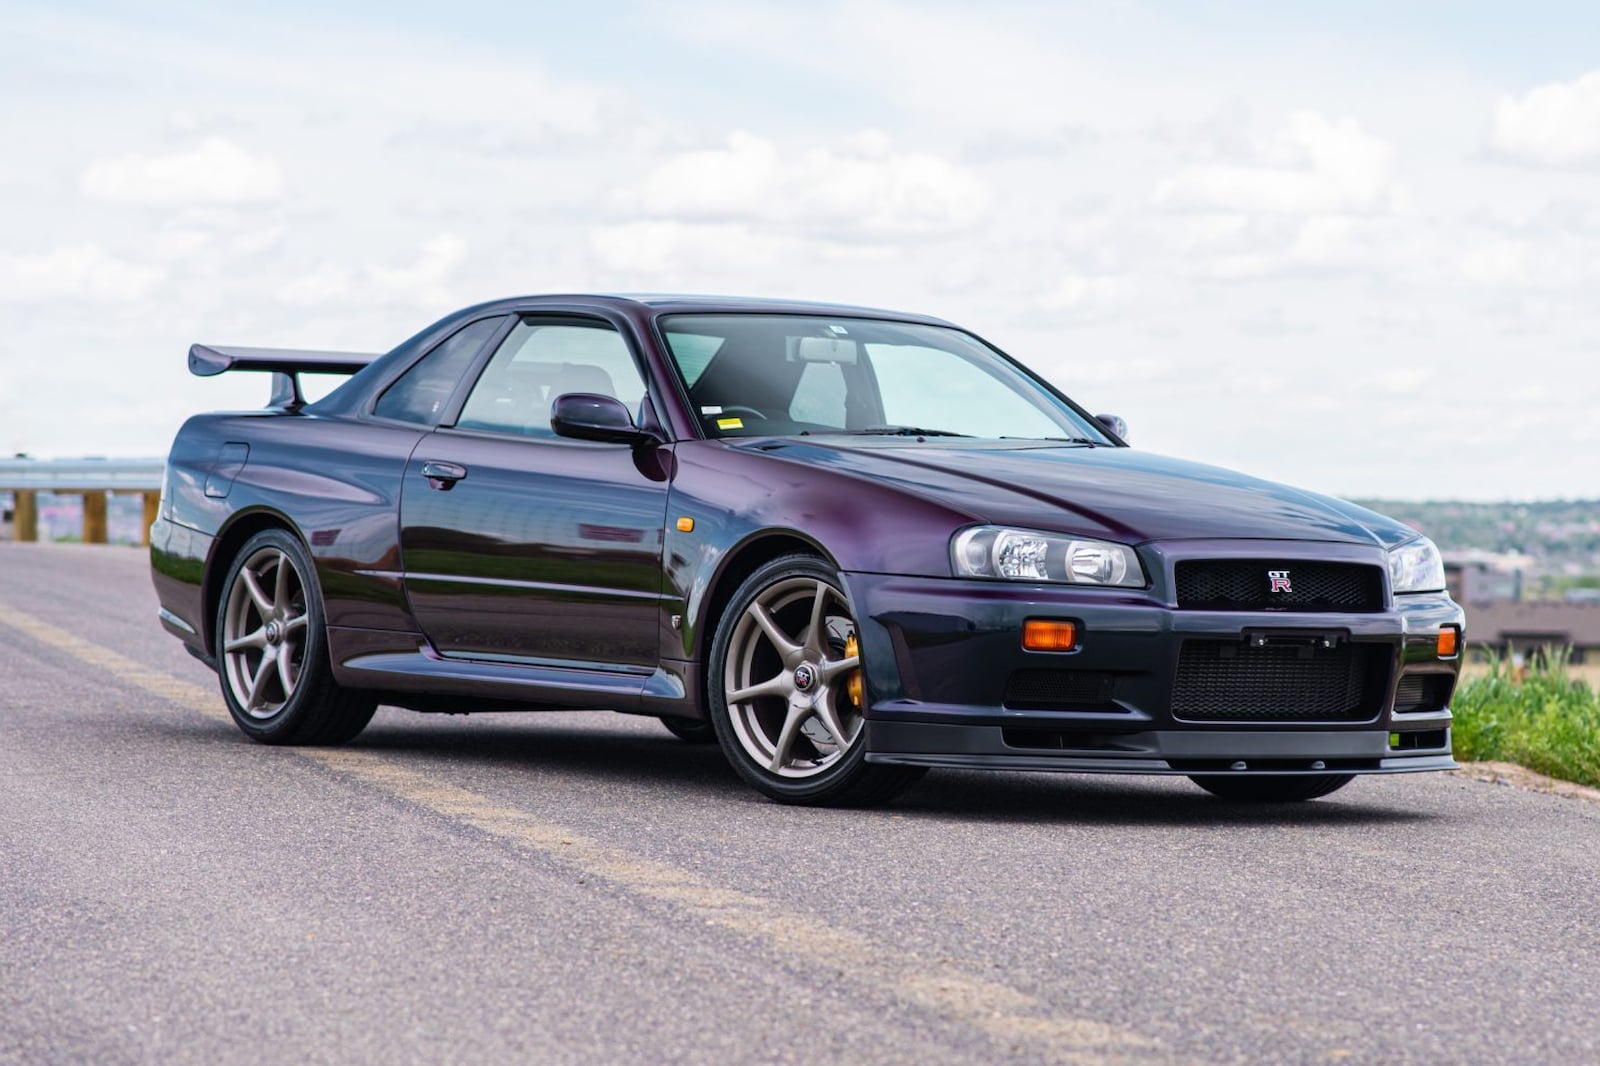 The R34 Skyline Is Finally Legal to Import to the U.S.—Here's Why